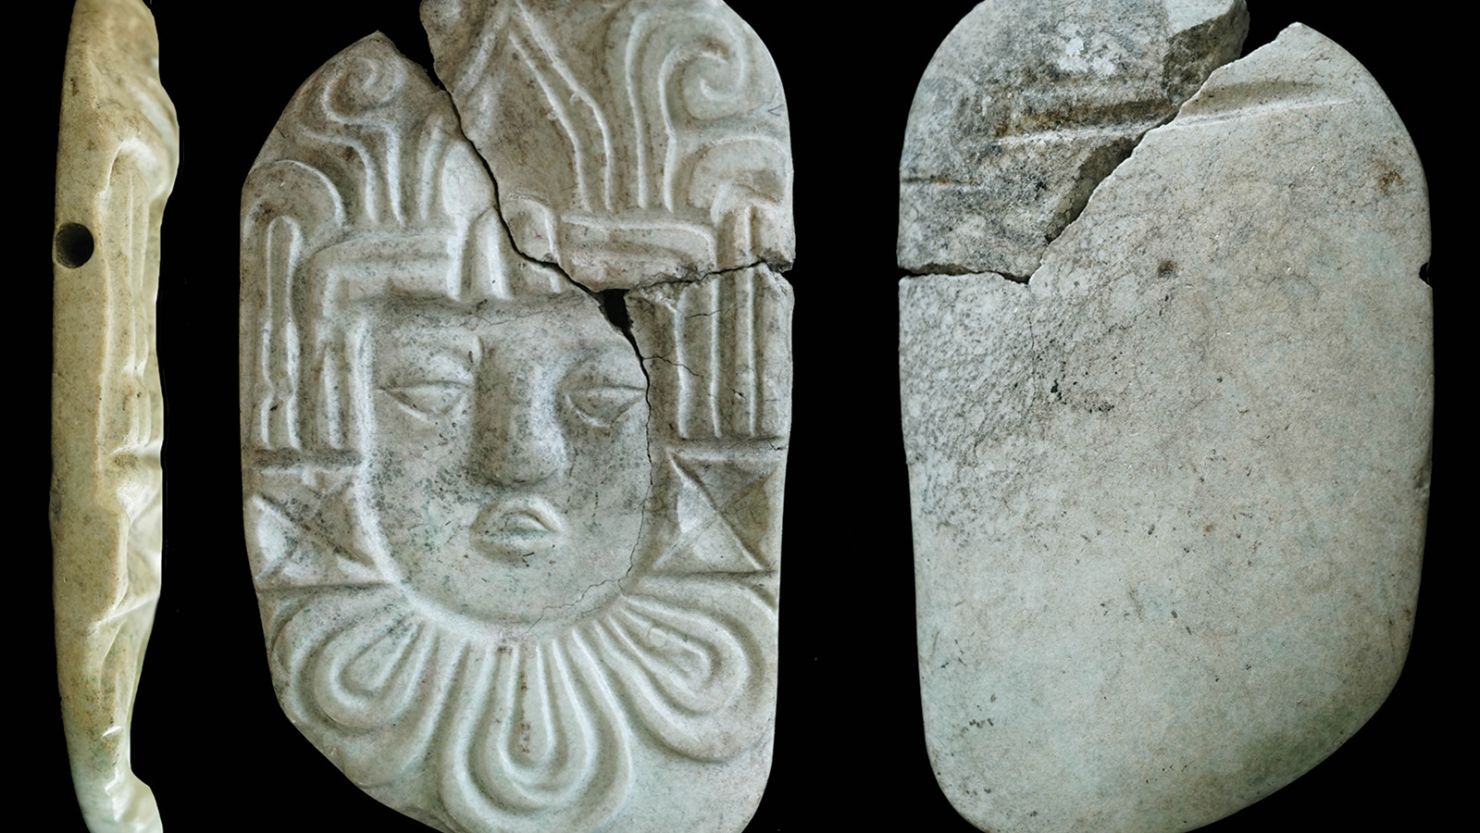 Burned grave goods found in a Maya pyramid with charred royal bones included a carved pendant plaque of a human head.